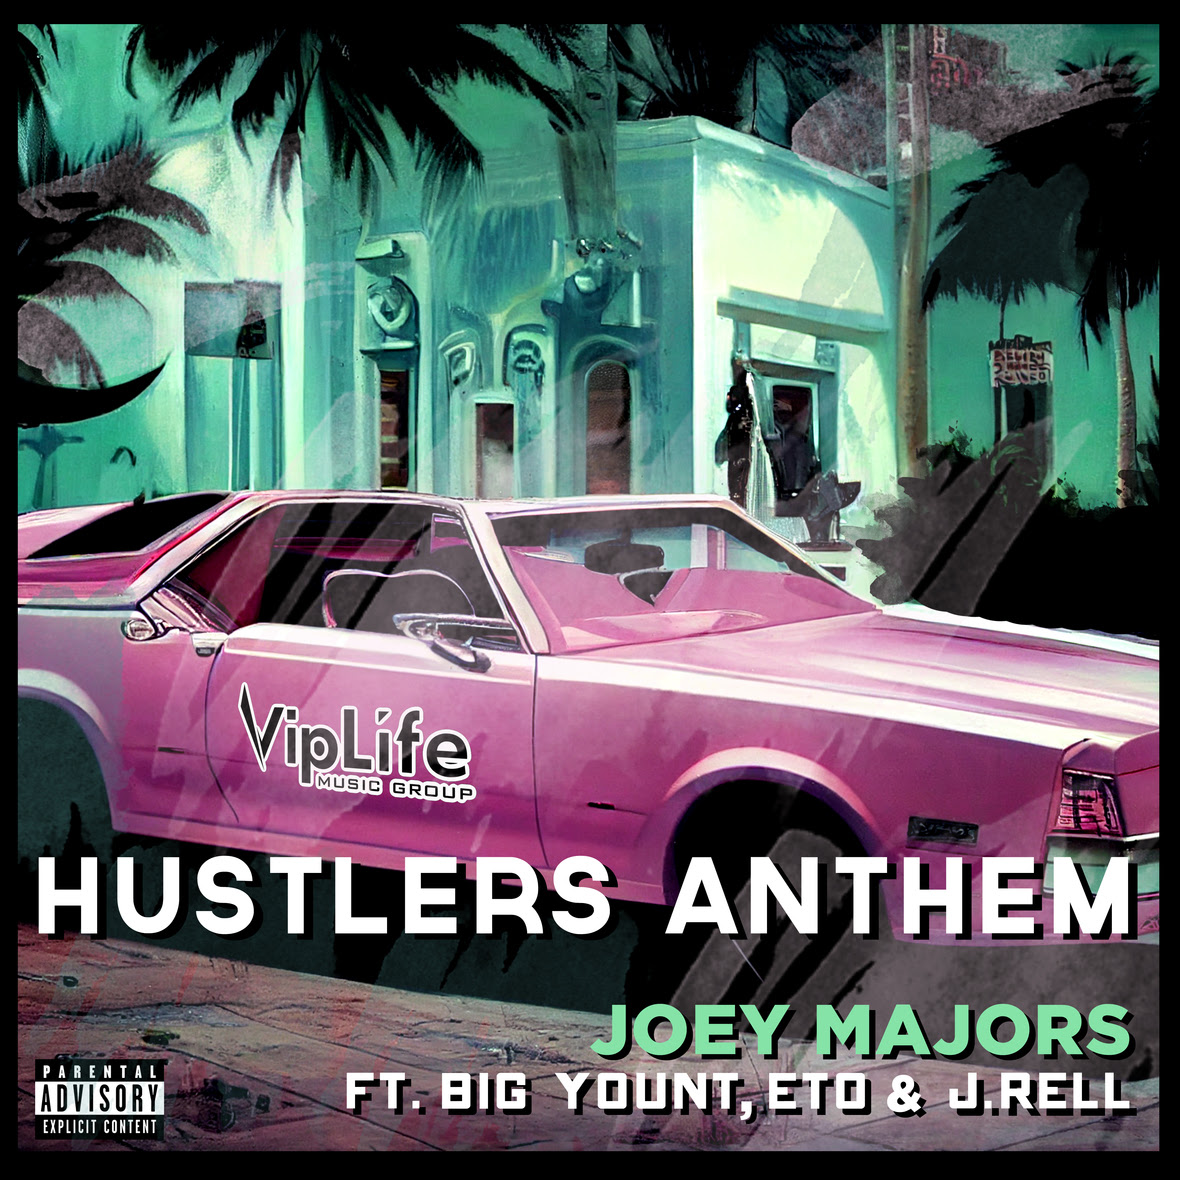 Joey Majors Drops "Hustlers Anthem" feat. Eto, Big Yount & J.Rell